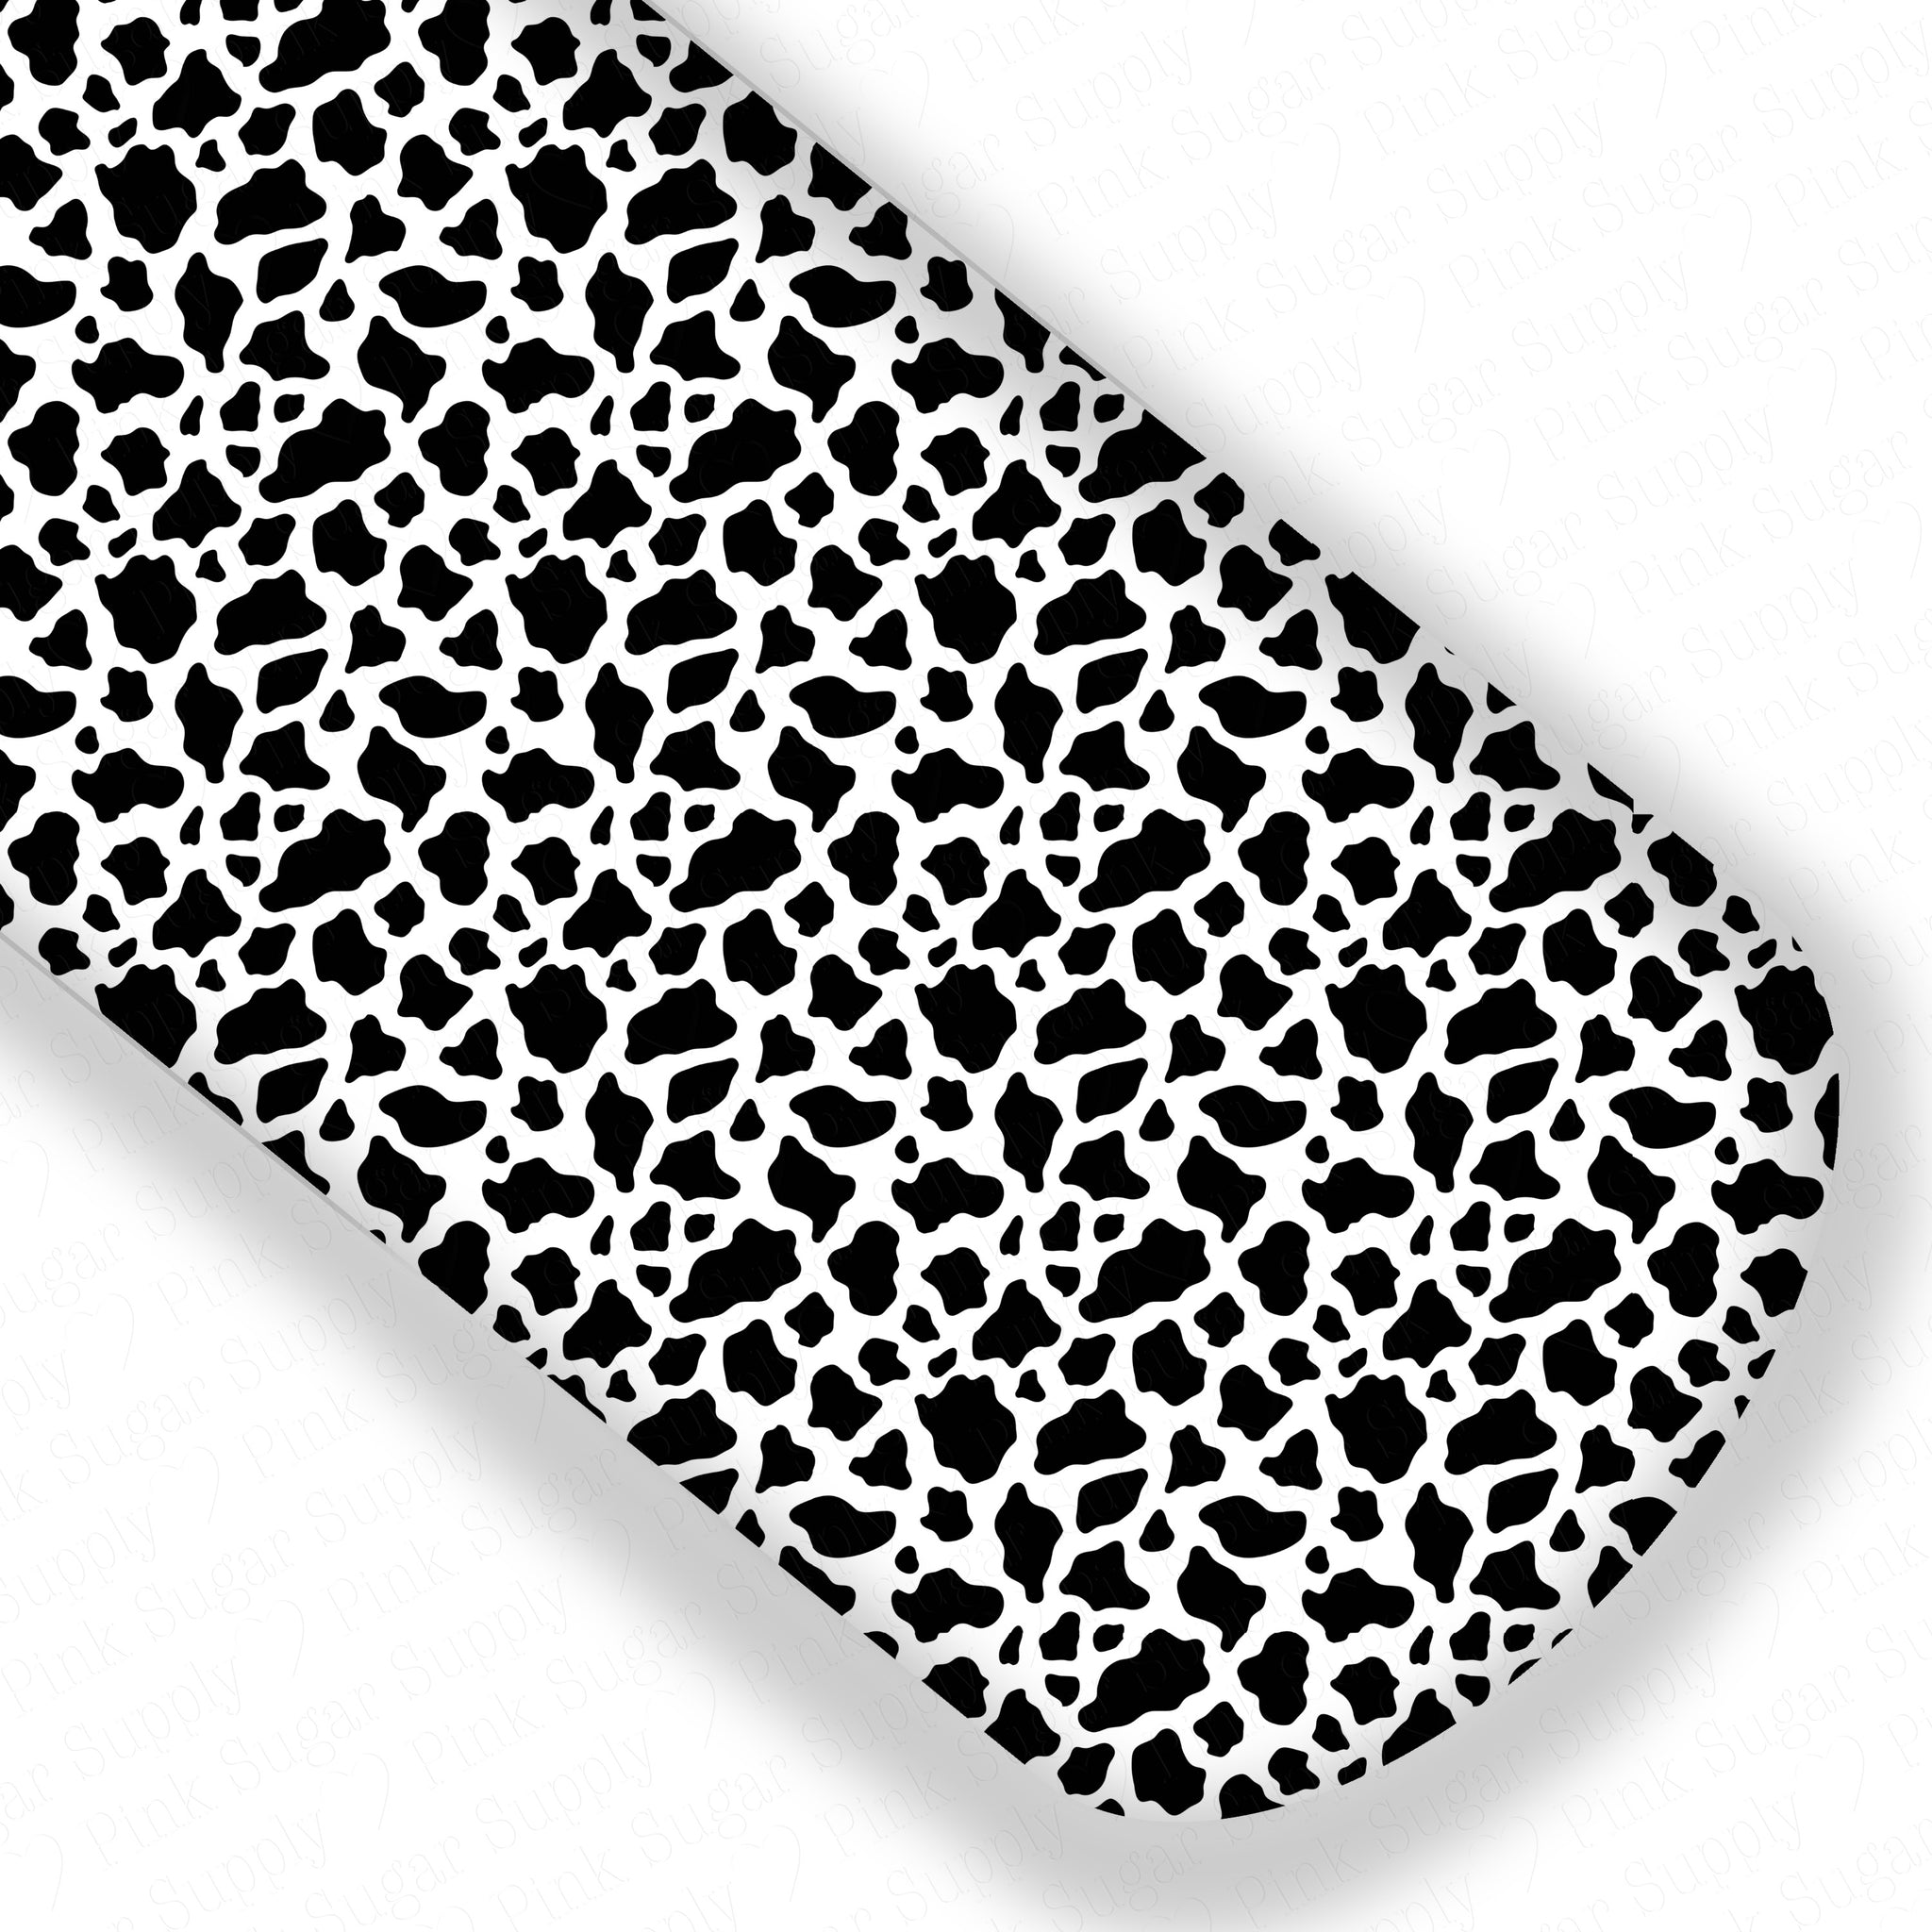 Cow Print Custom Textured Faux Leather